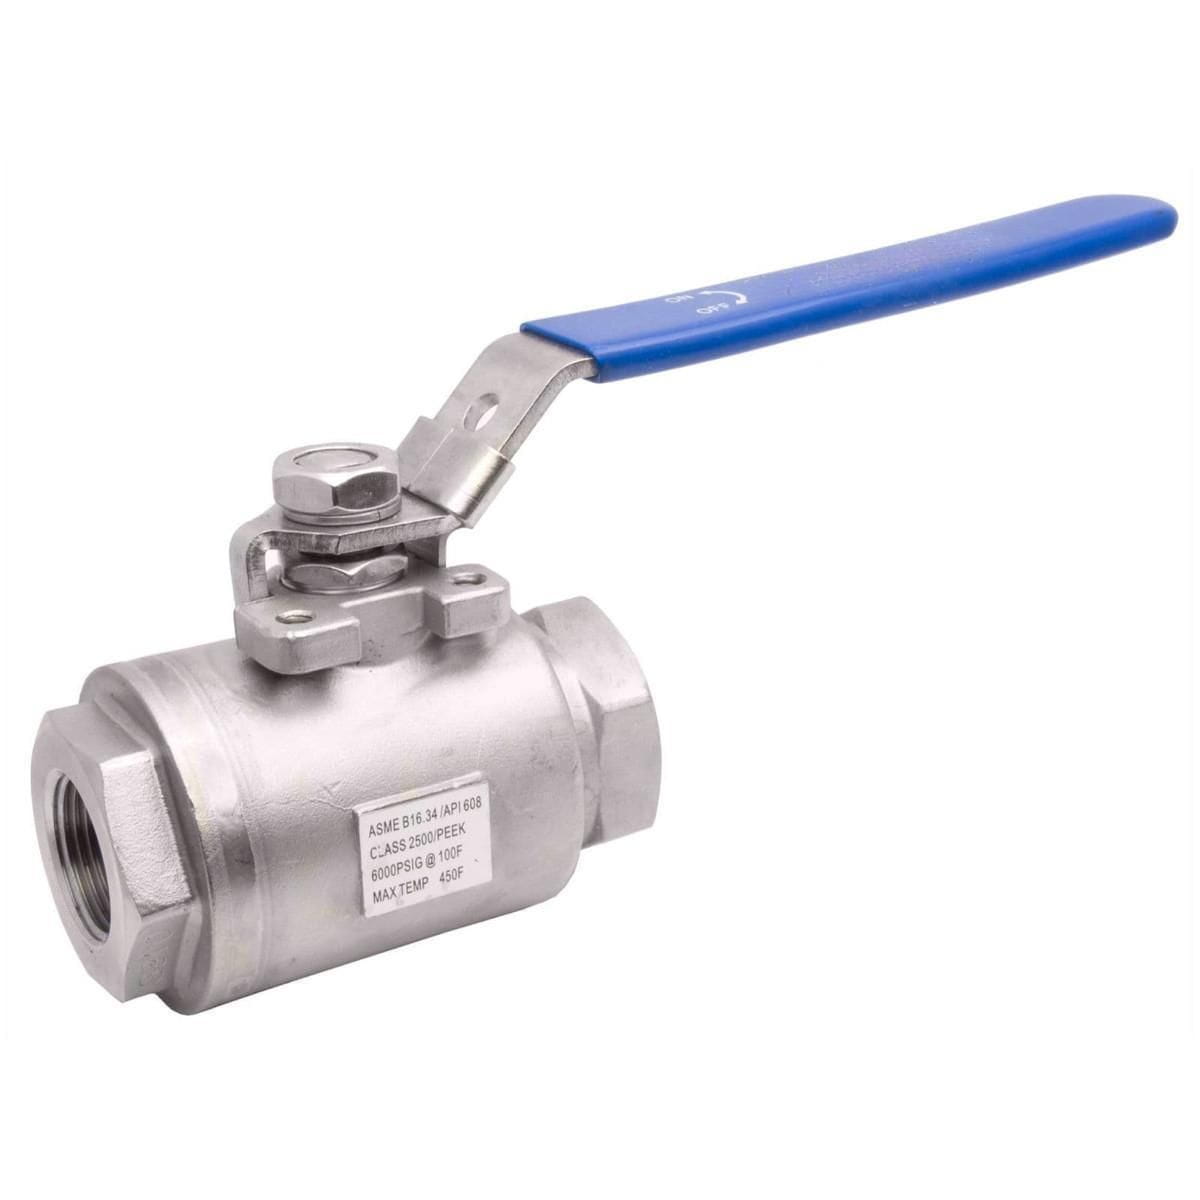 2 Piece Forged Stainless Steel Ball Valve, 6000 WOG PSI CWP